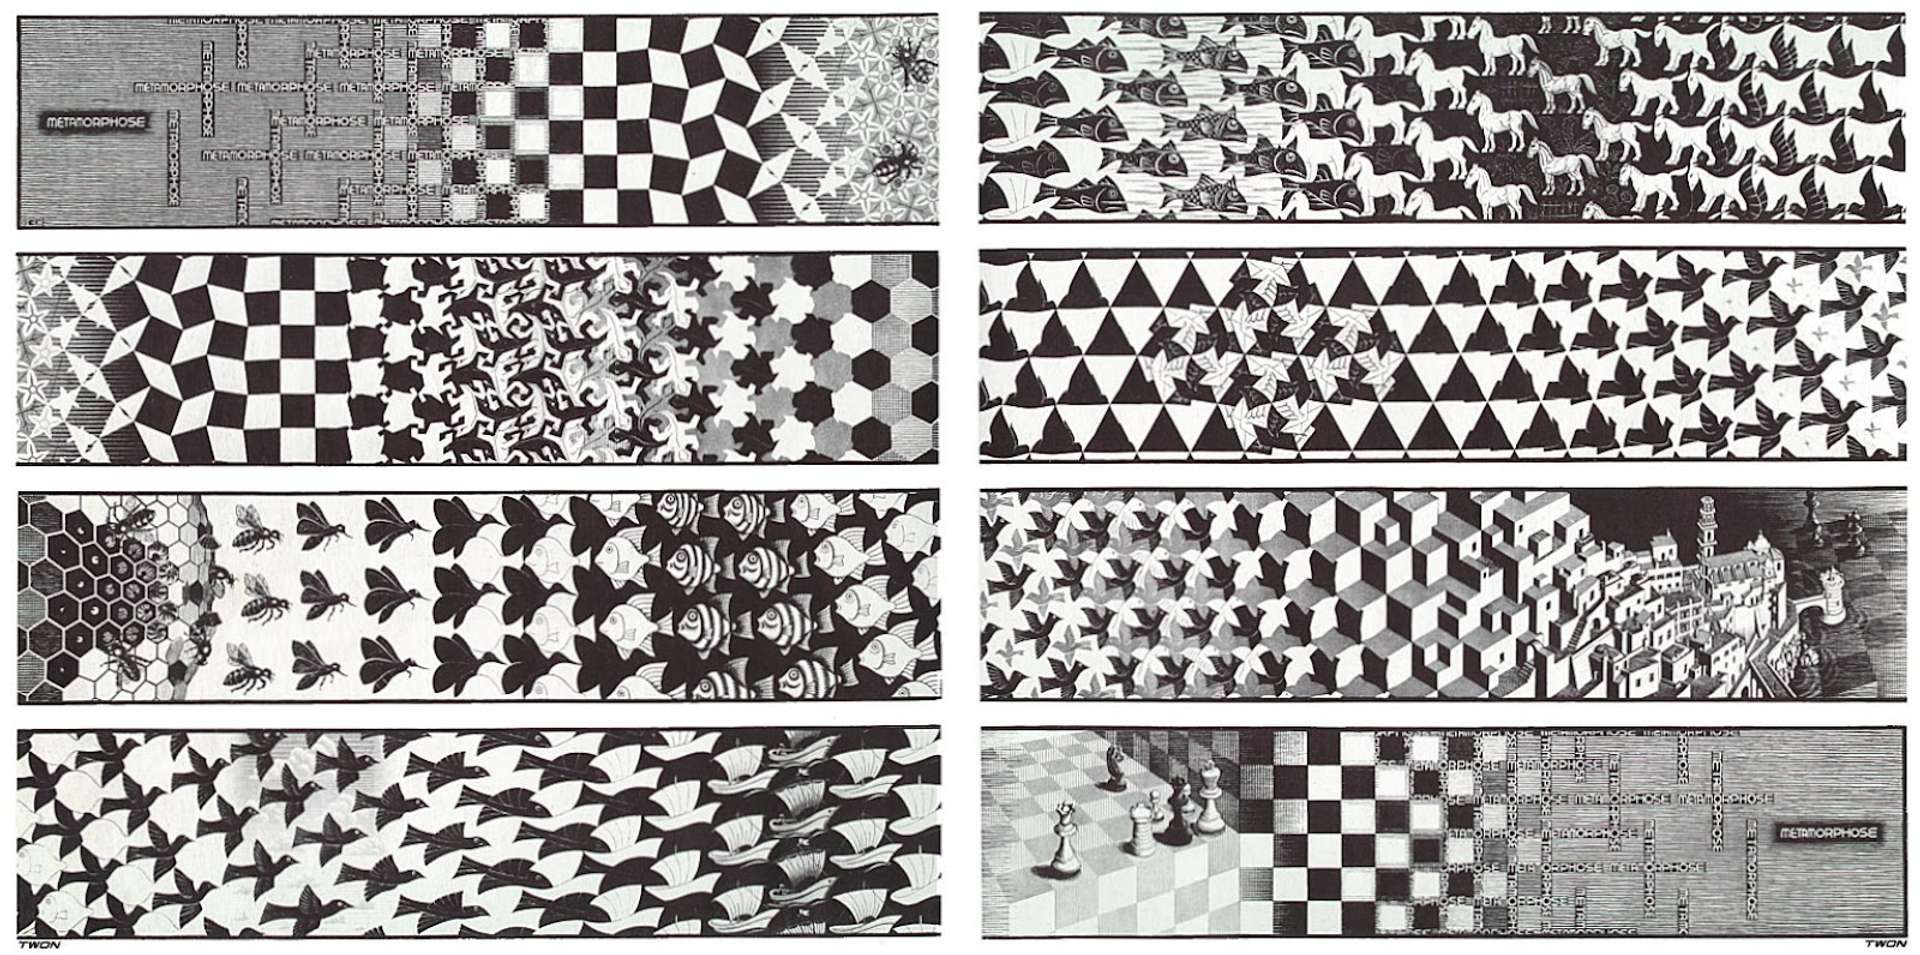 A lithograph print titled "Metamorphosis III" by M.C. Escher, featuring interlocking geometric shapes that transform and evolve into various forms and patterns.